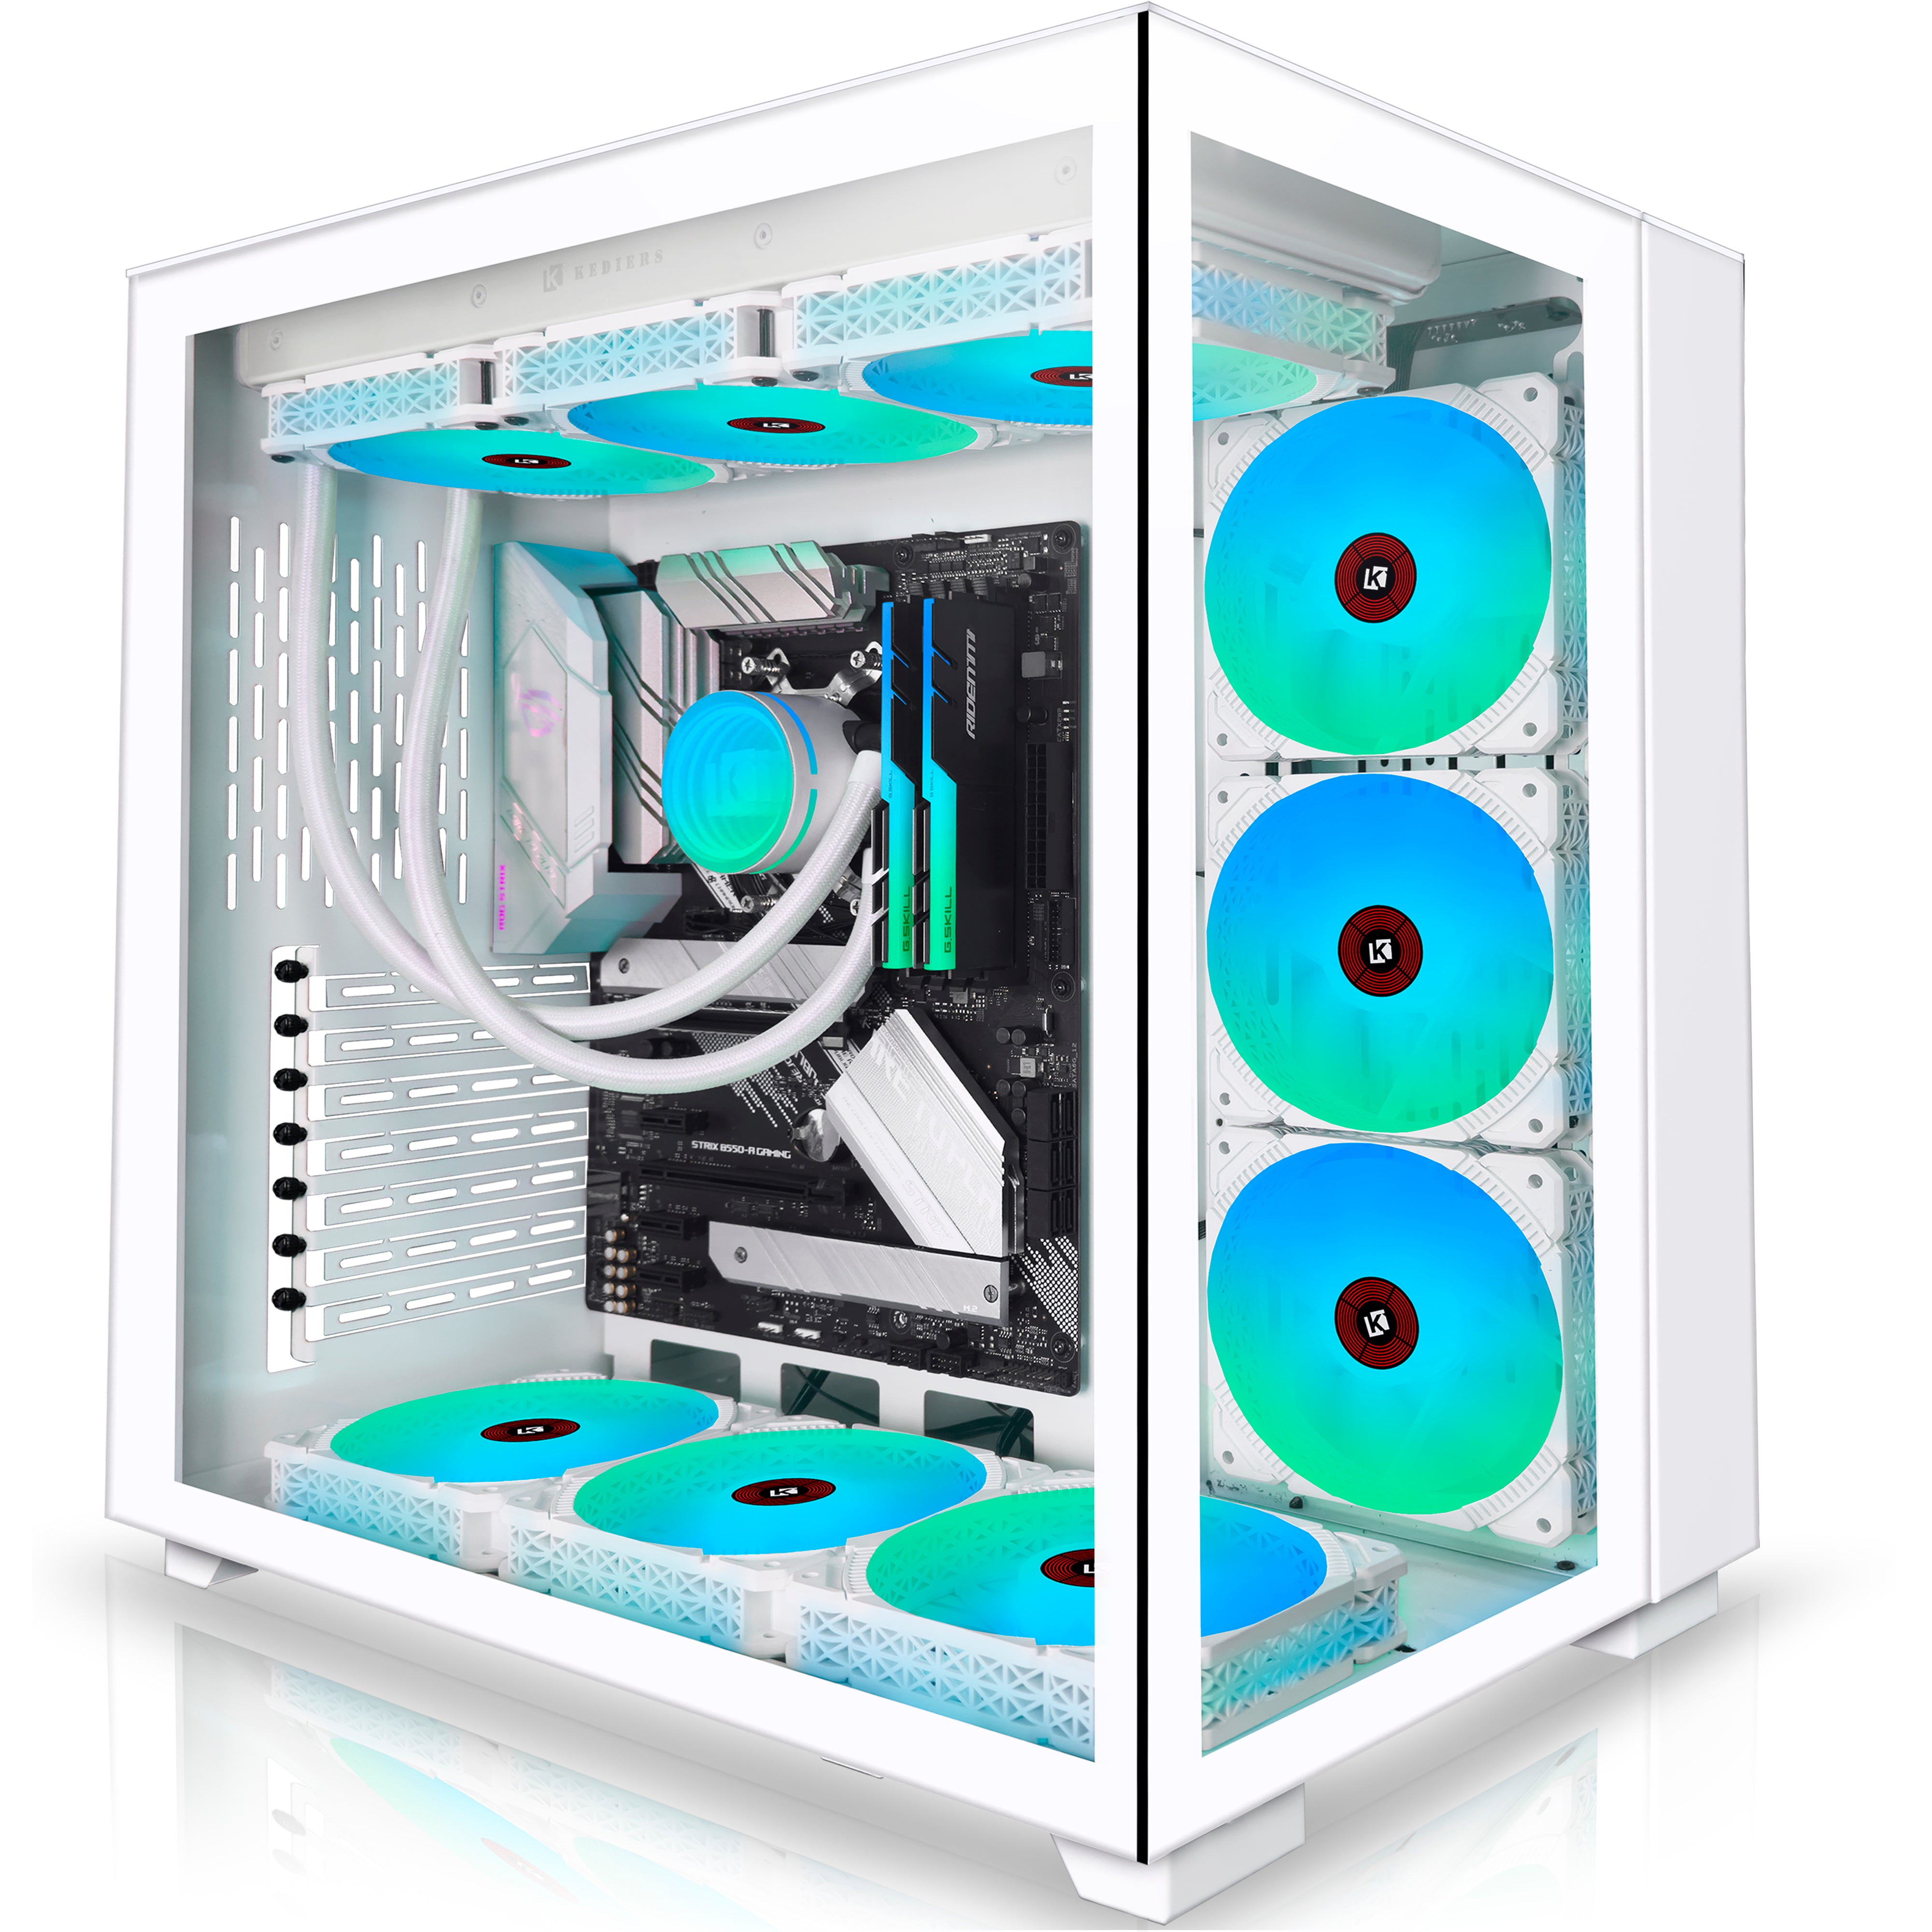 KEDIERS PC Case Pre-Install 7 PWM ARGB Cases Fans, ATX Mid Tower Gaming  Case with Opening Tempered Glass Side Panel Door, Mesh Computer